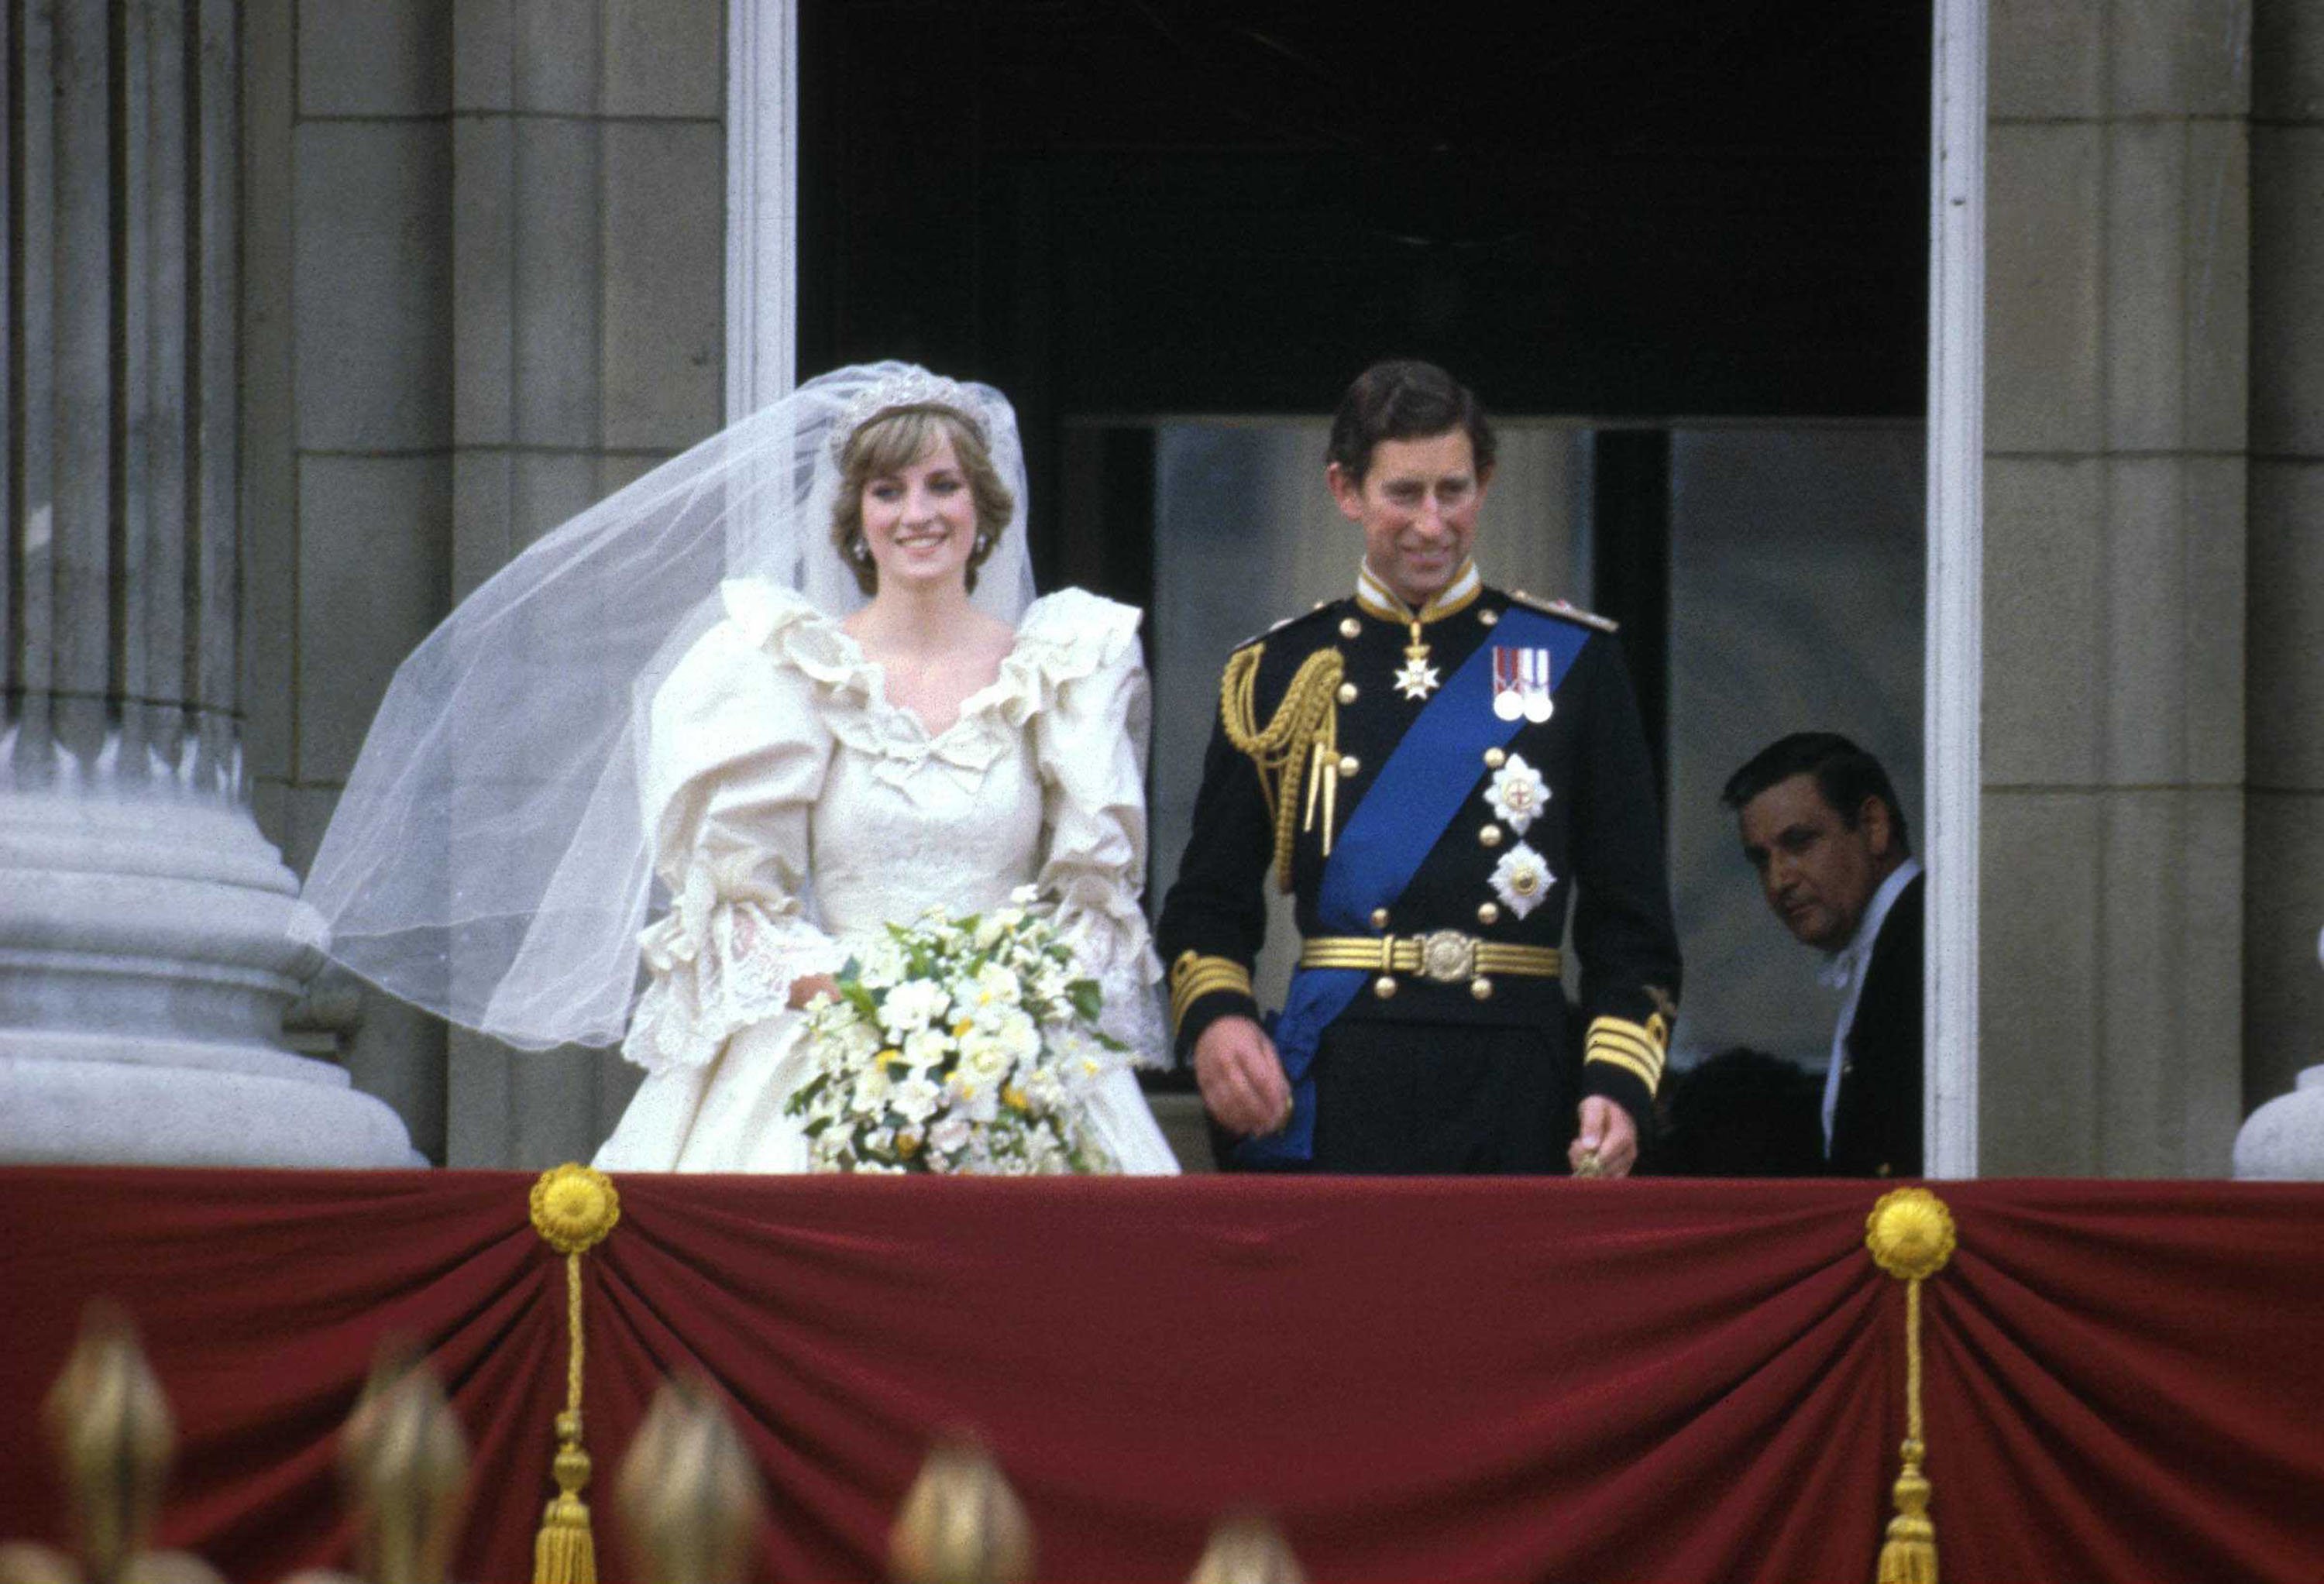 Prince Charles & Princess Diana (1961 - 1997) stand on the balcony of Buckingham Palace after their wedding ceremony at St. Paul's Cathedral, London, England, July 29, 1981. | Source: Getty Images